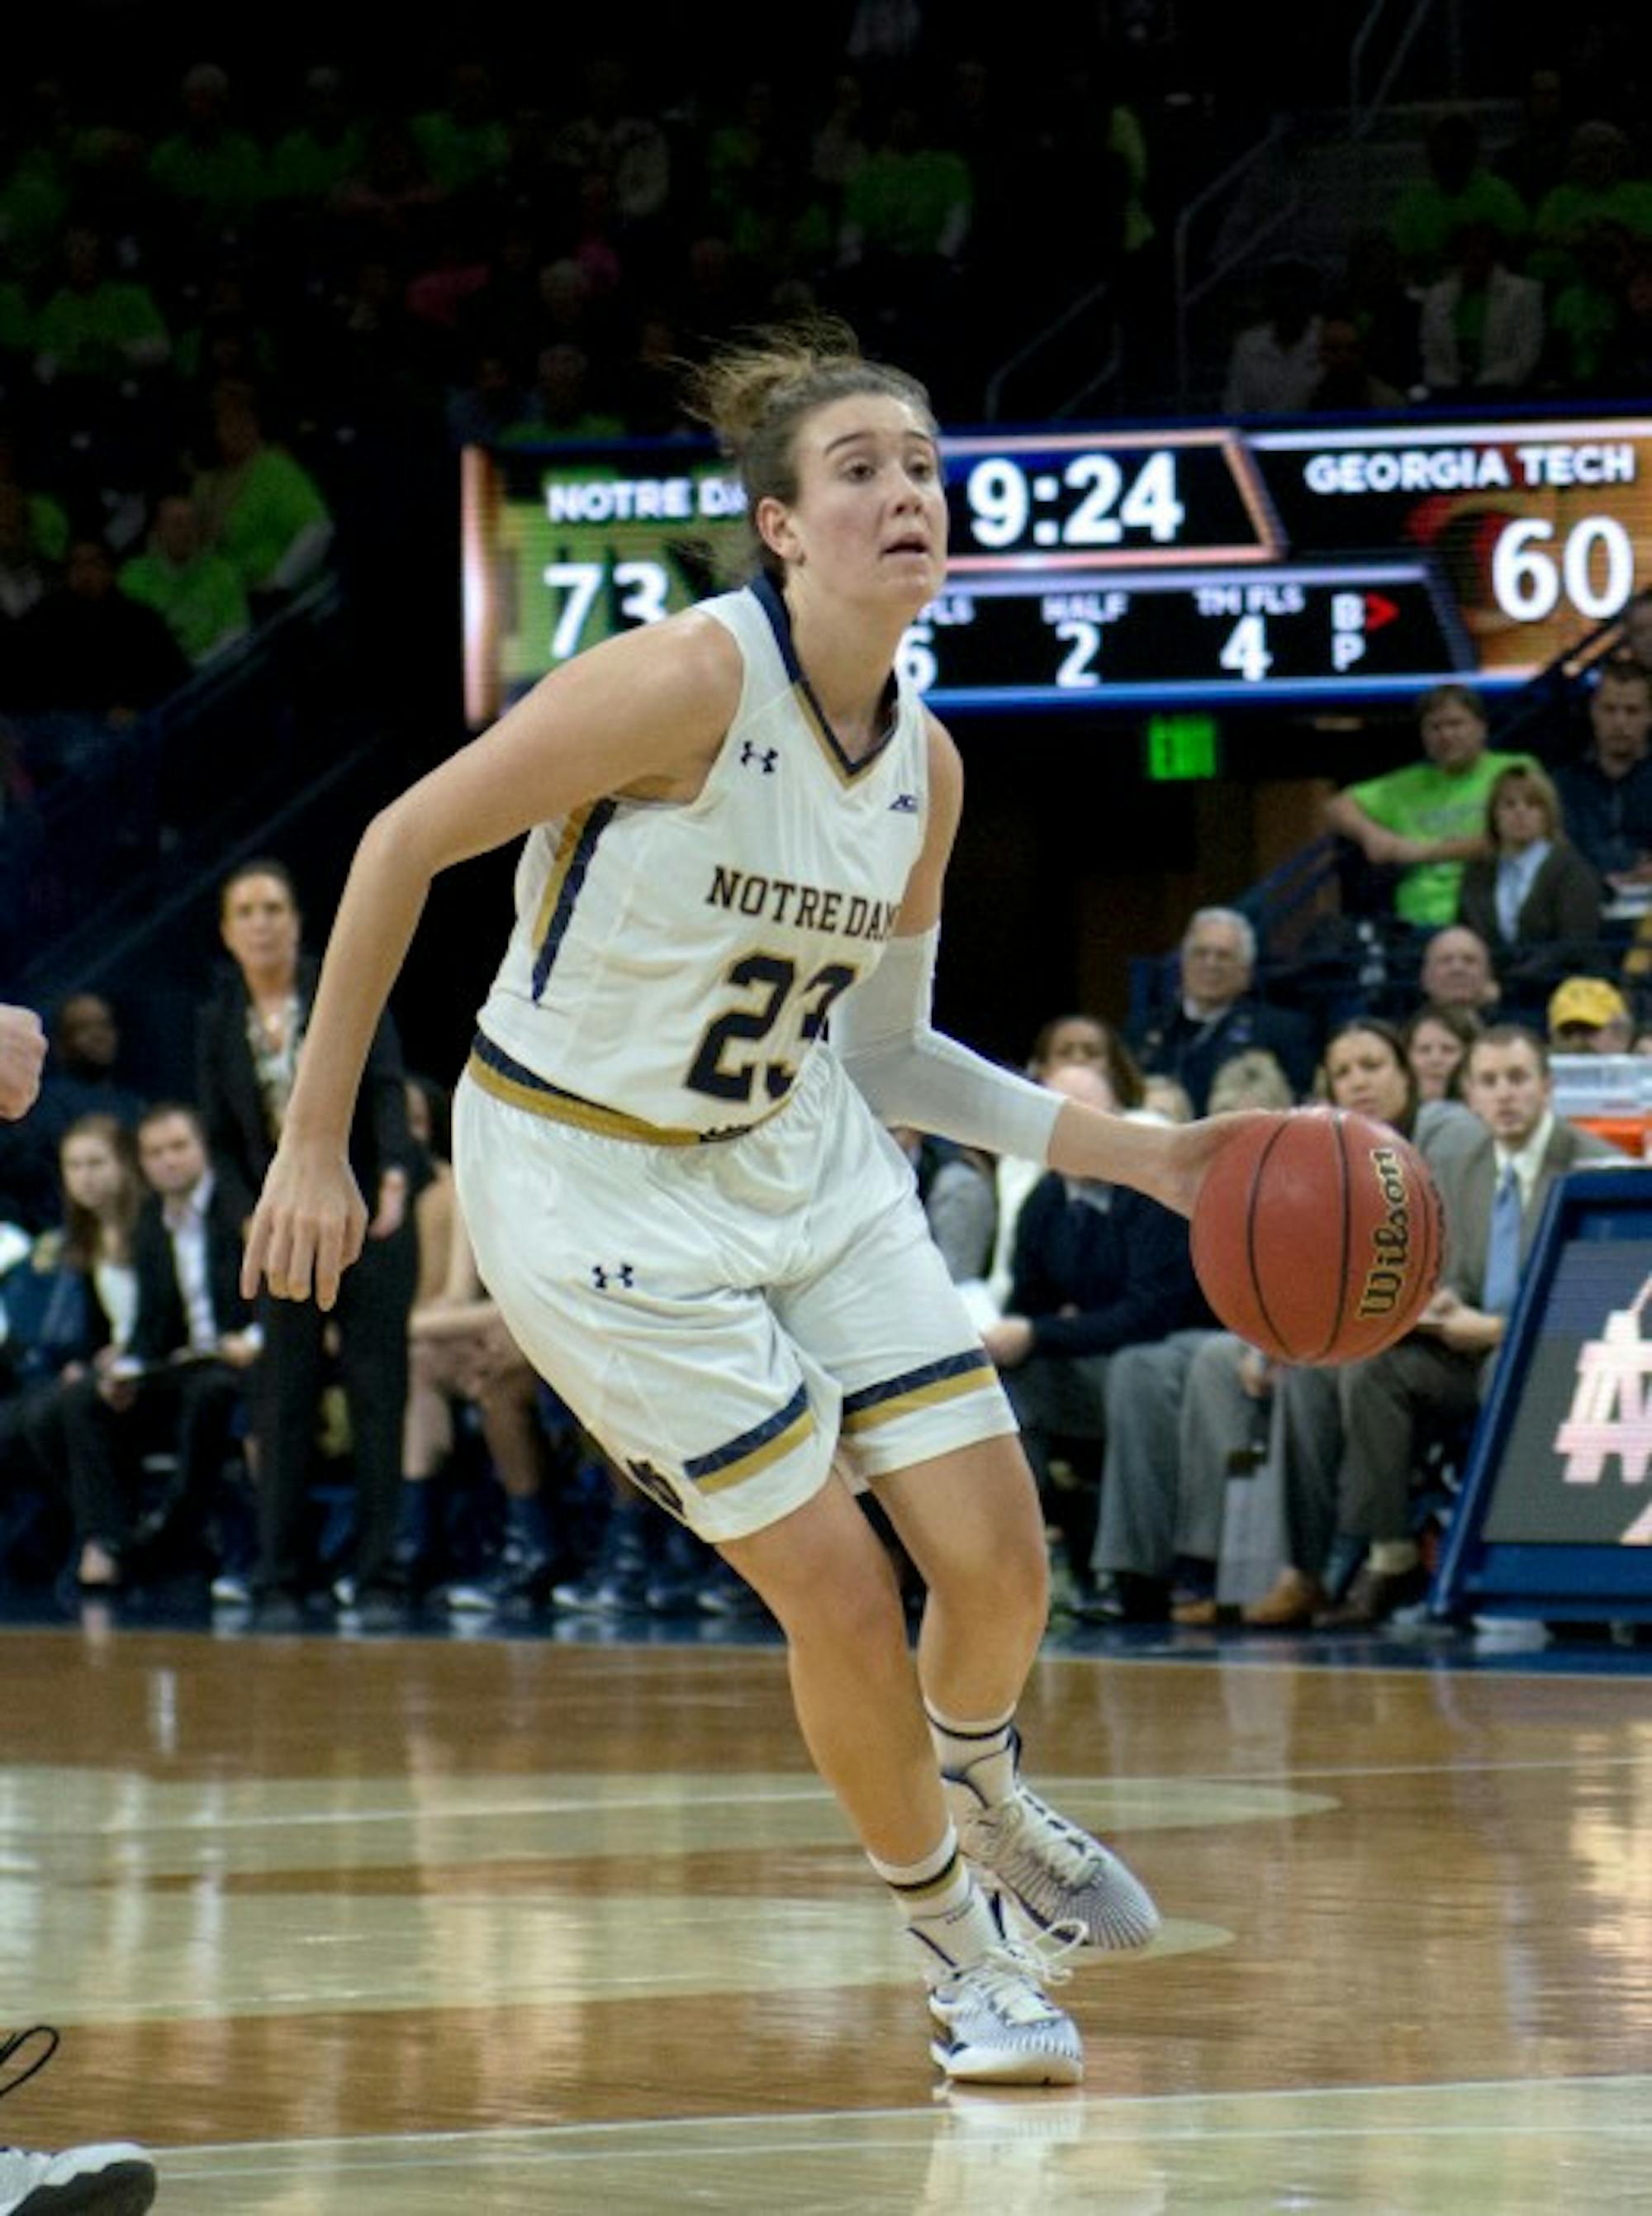 Irish freshman forward Kathryn Westbeld surveys the defense during Notre Dame's 89-76 win Thursday over Georgia Tech at Purcell Pavilion.